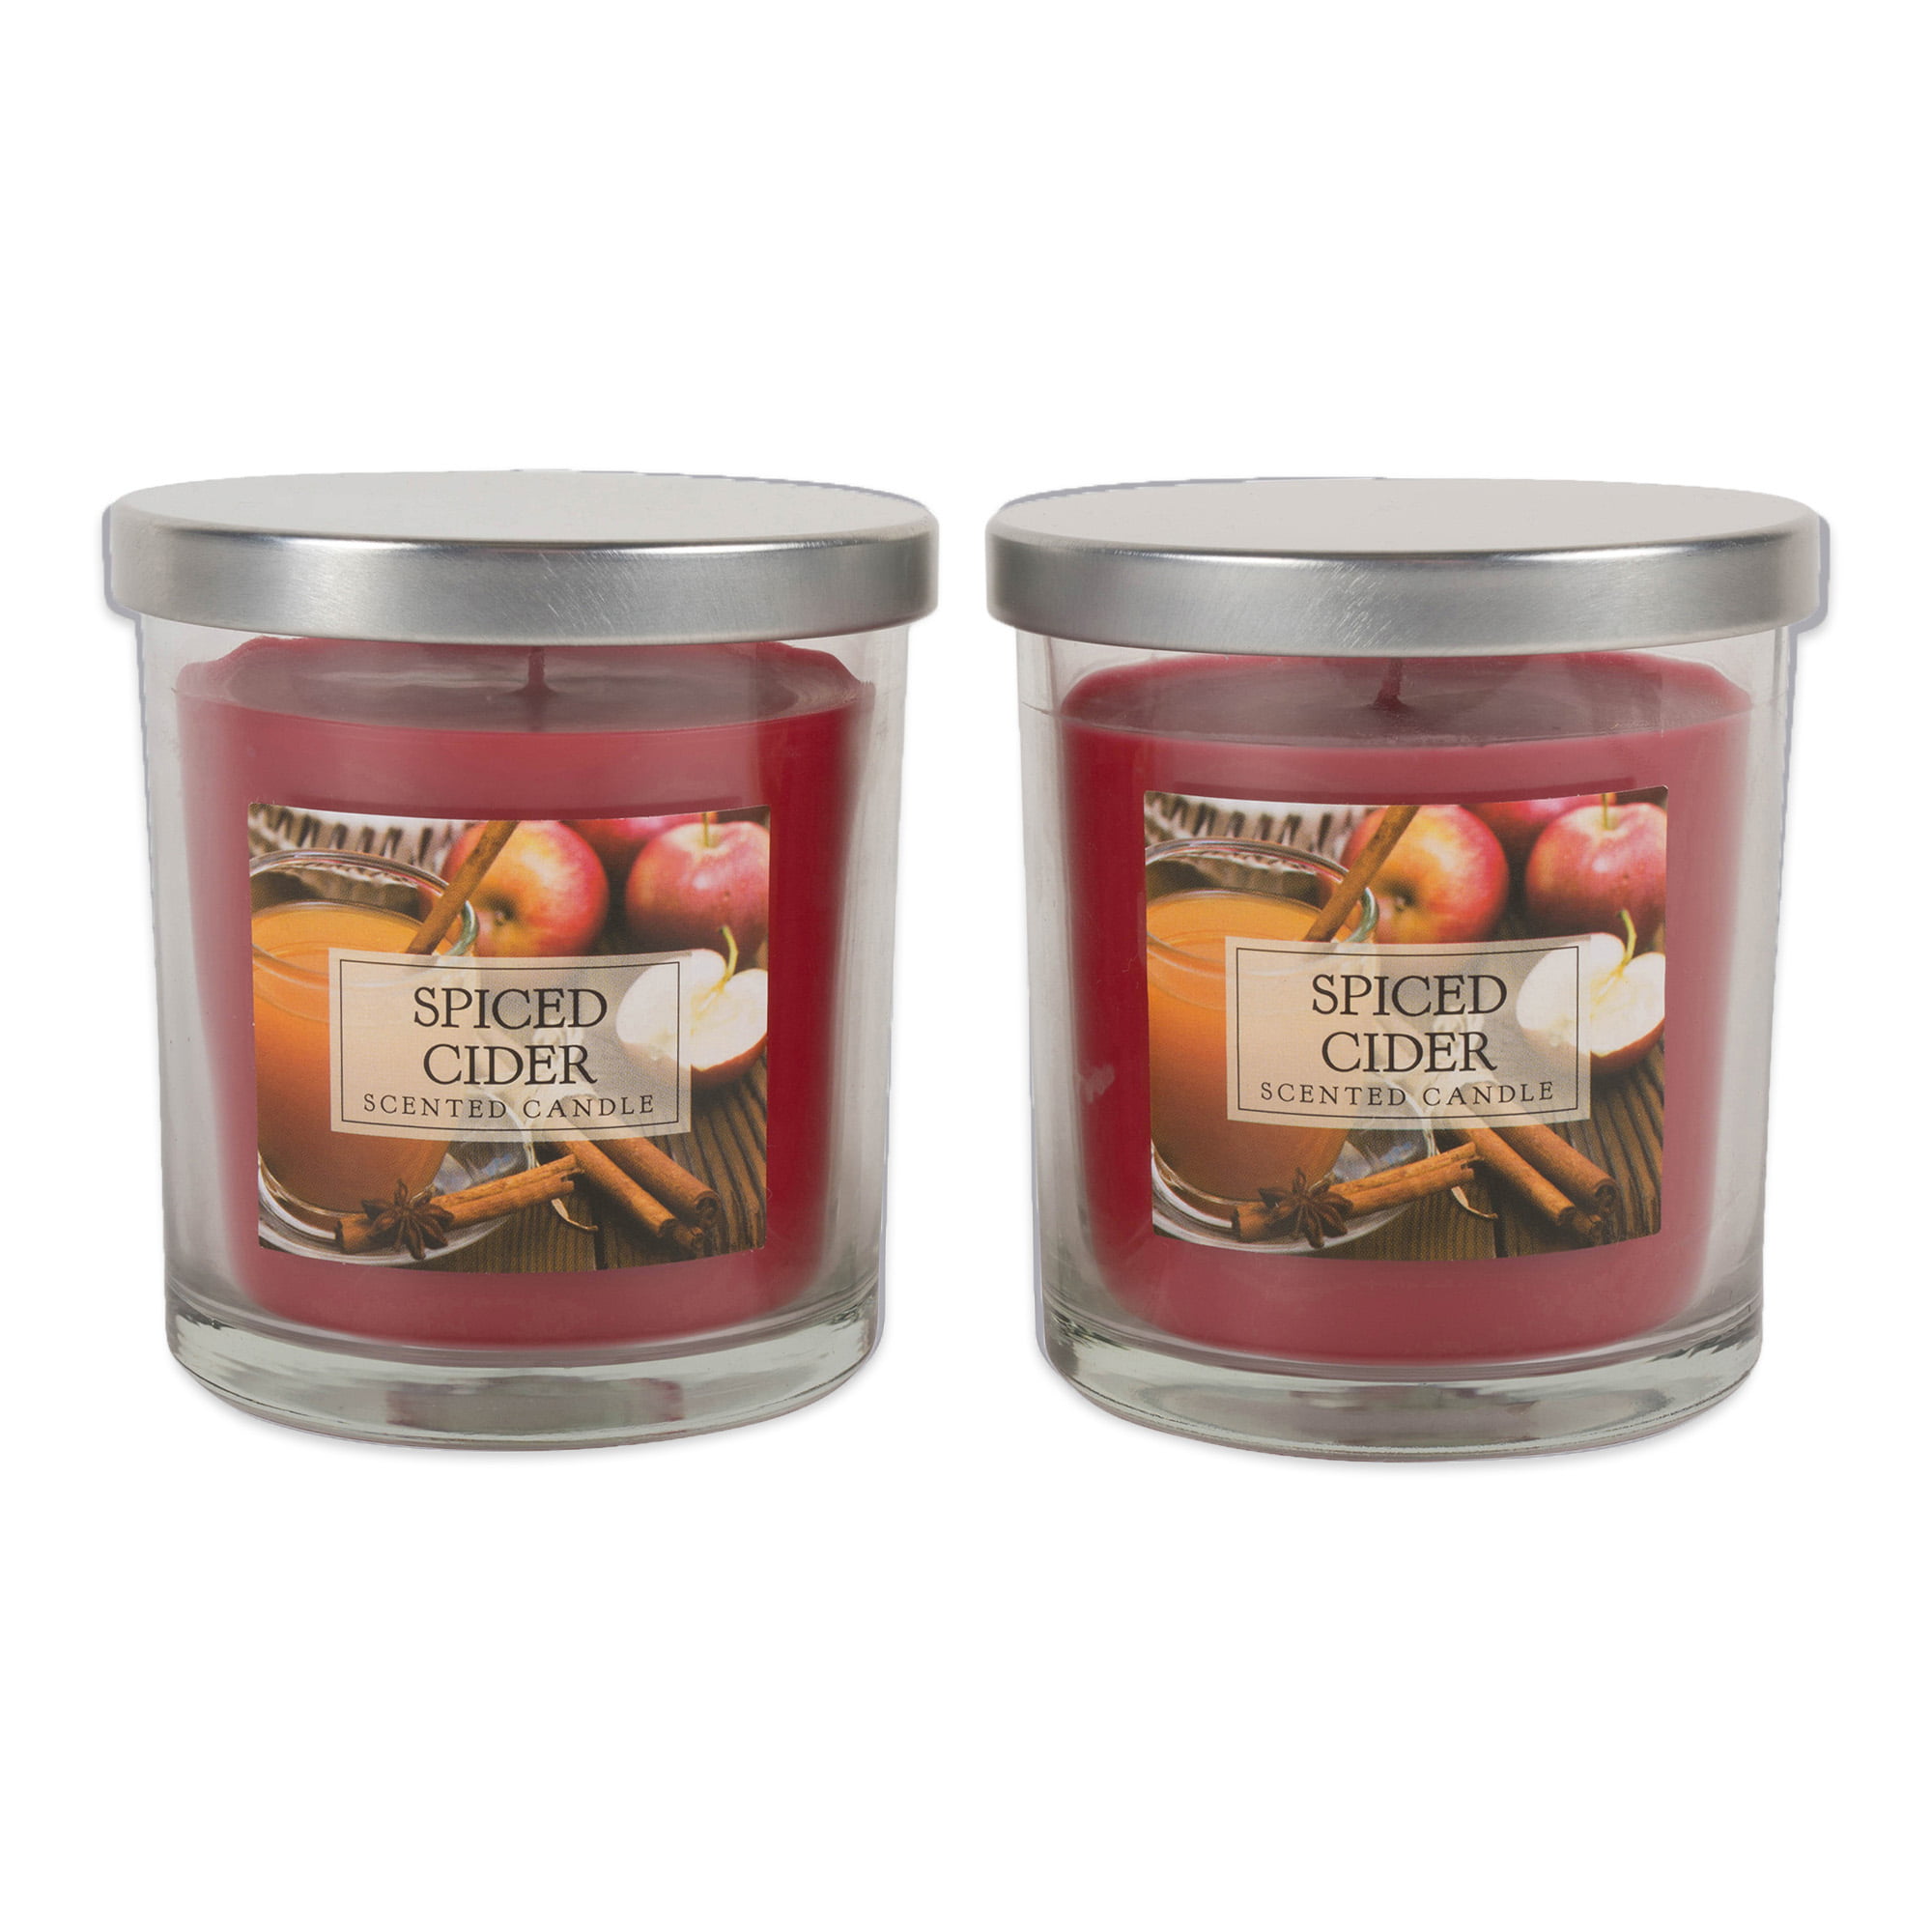 14.5 Oz -Fresh Fruit Scent Hour Burn Time DII Home Traditions 3-Wick Evenly Burning Highly Scented 4x4 Large Jar Candle with 45